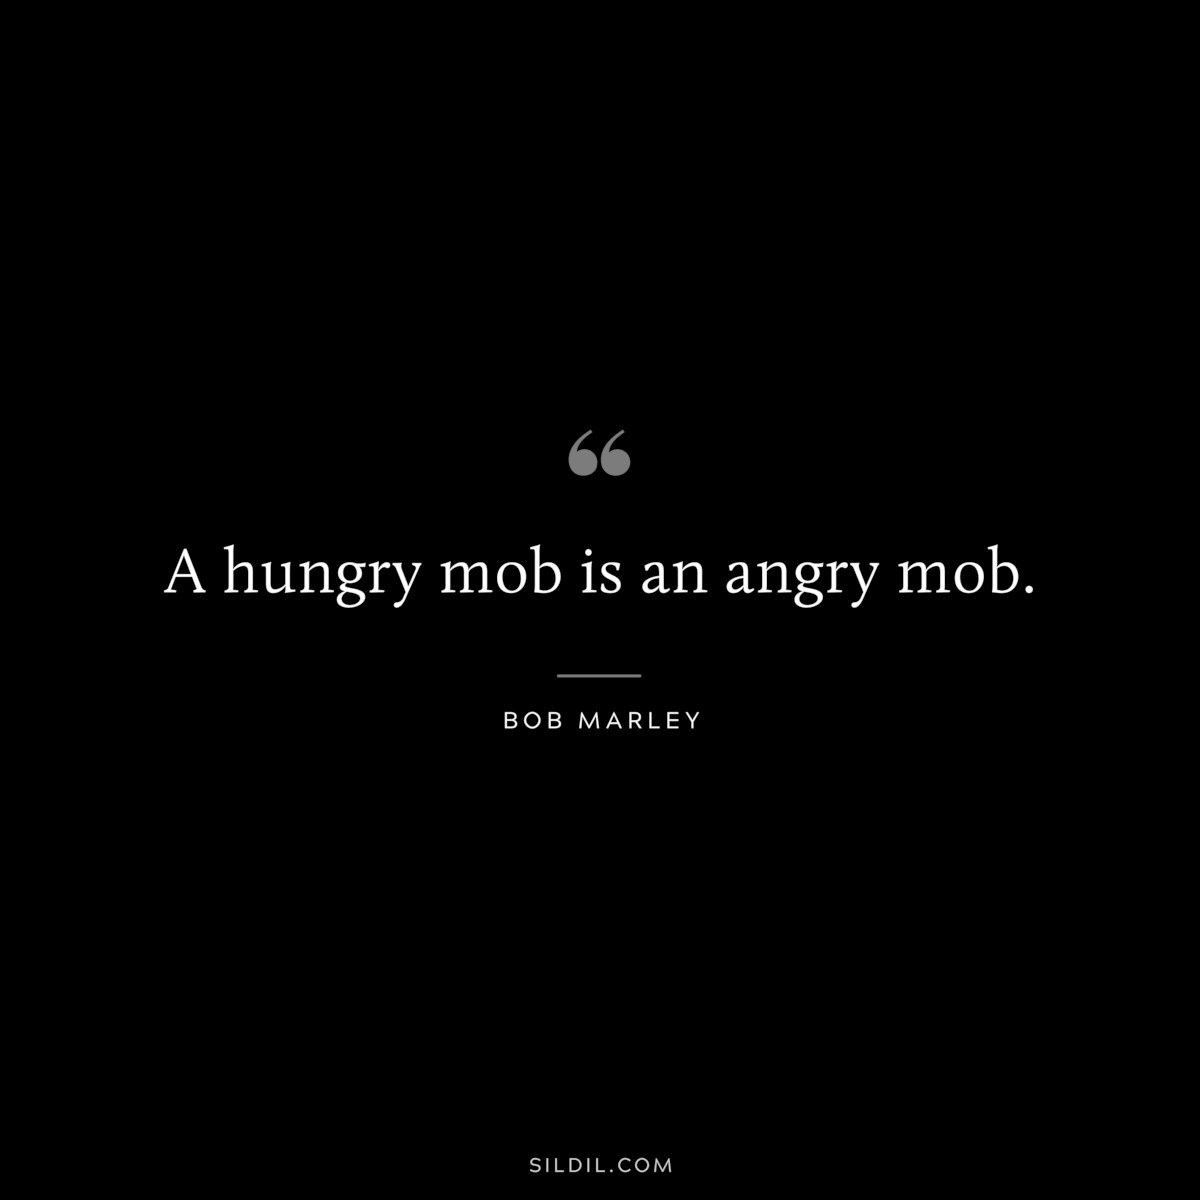 A hungry mob is an angry mob. ― Bob Marley